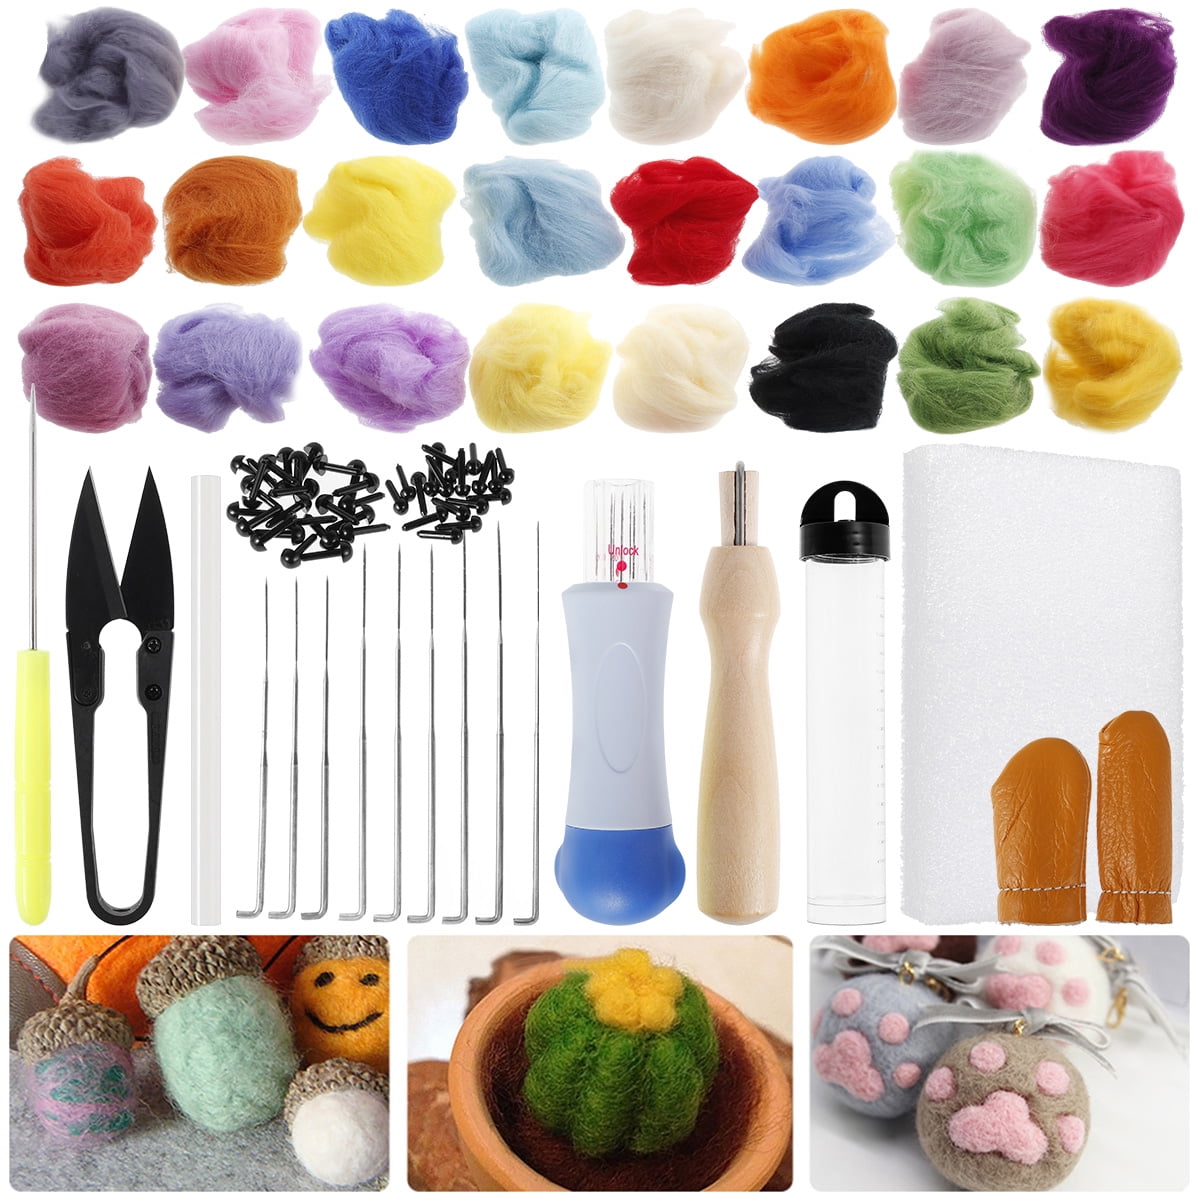  Woolbuddy Needle Felting Kit Beginner, Wool Felting Kit for  Adults, Includes 2 Felting Needles and Photo Instructions, DIY Needle  Felting Kit for Arts and Crafts (Elephant) : Arts, Crafts & Sewing